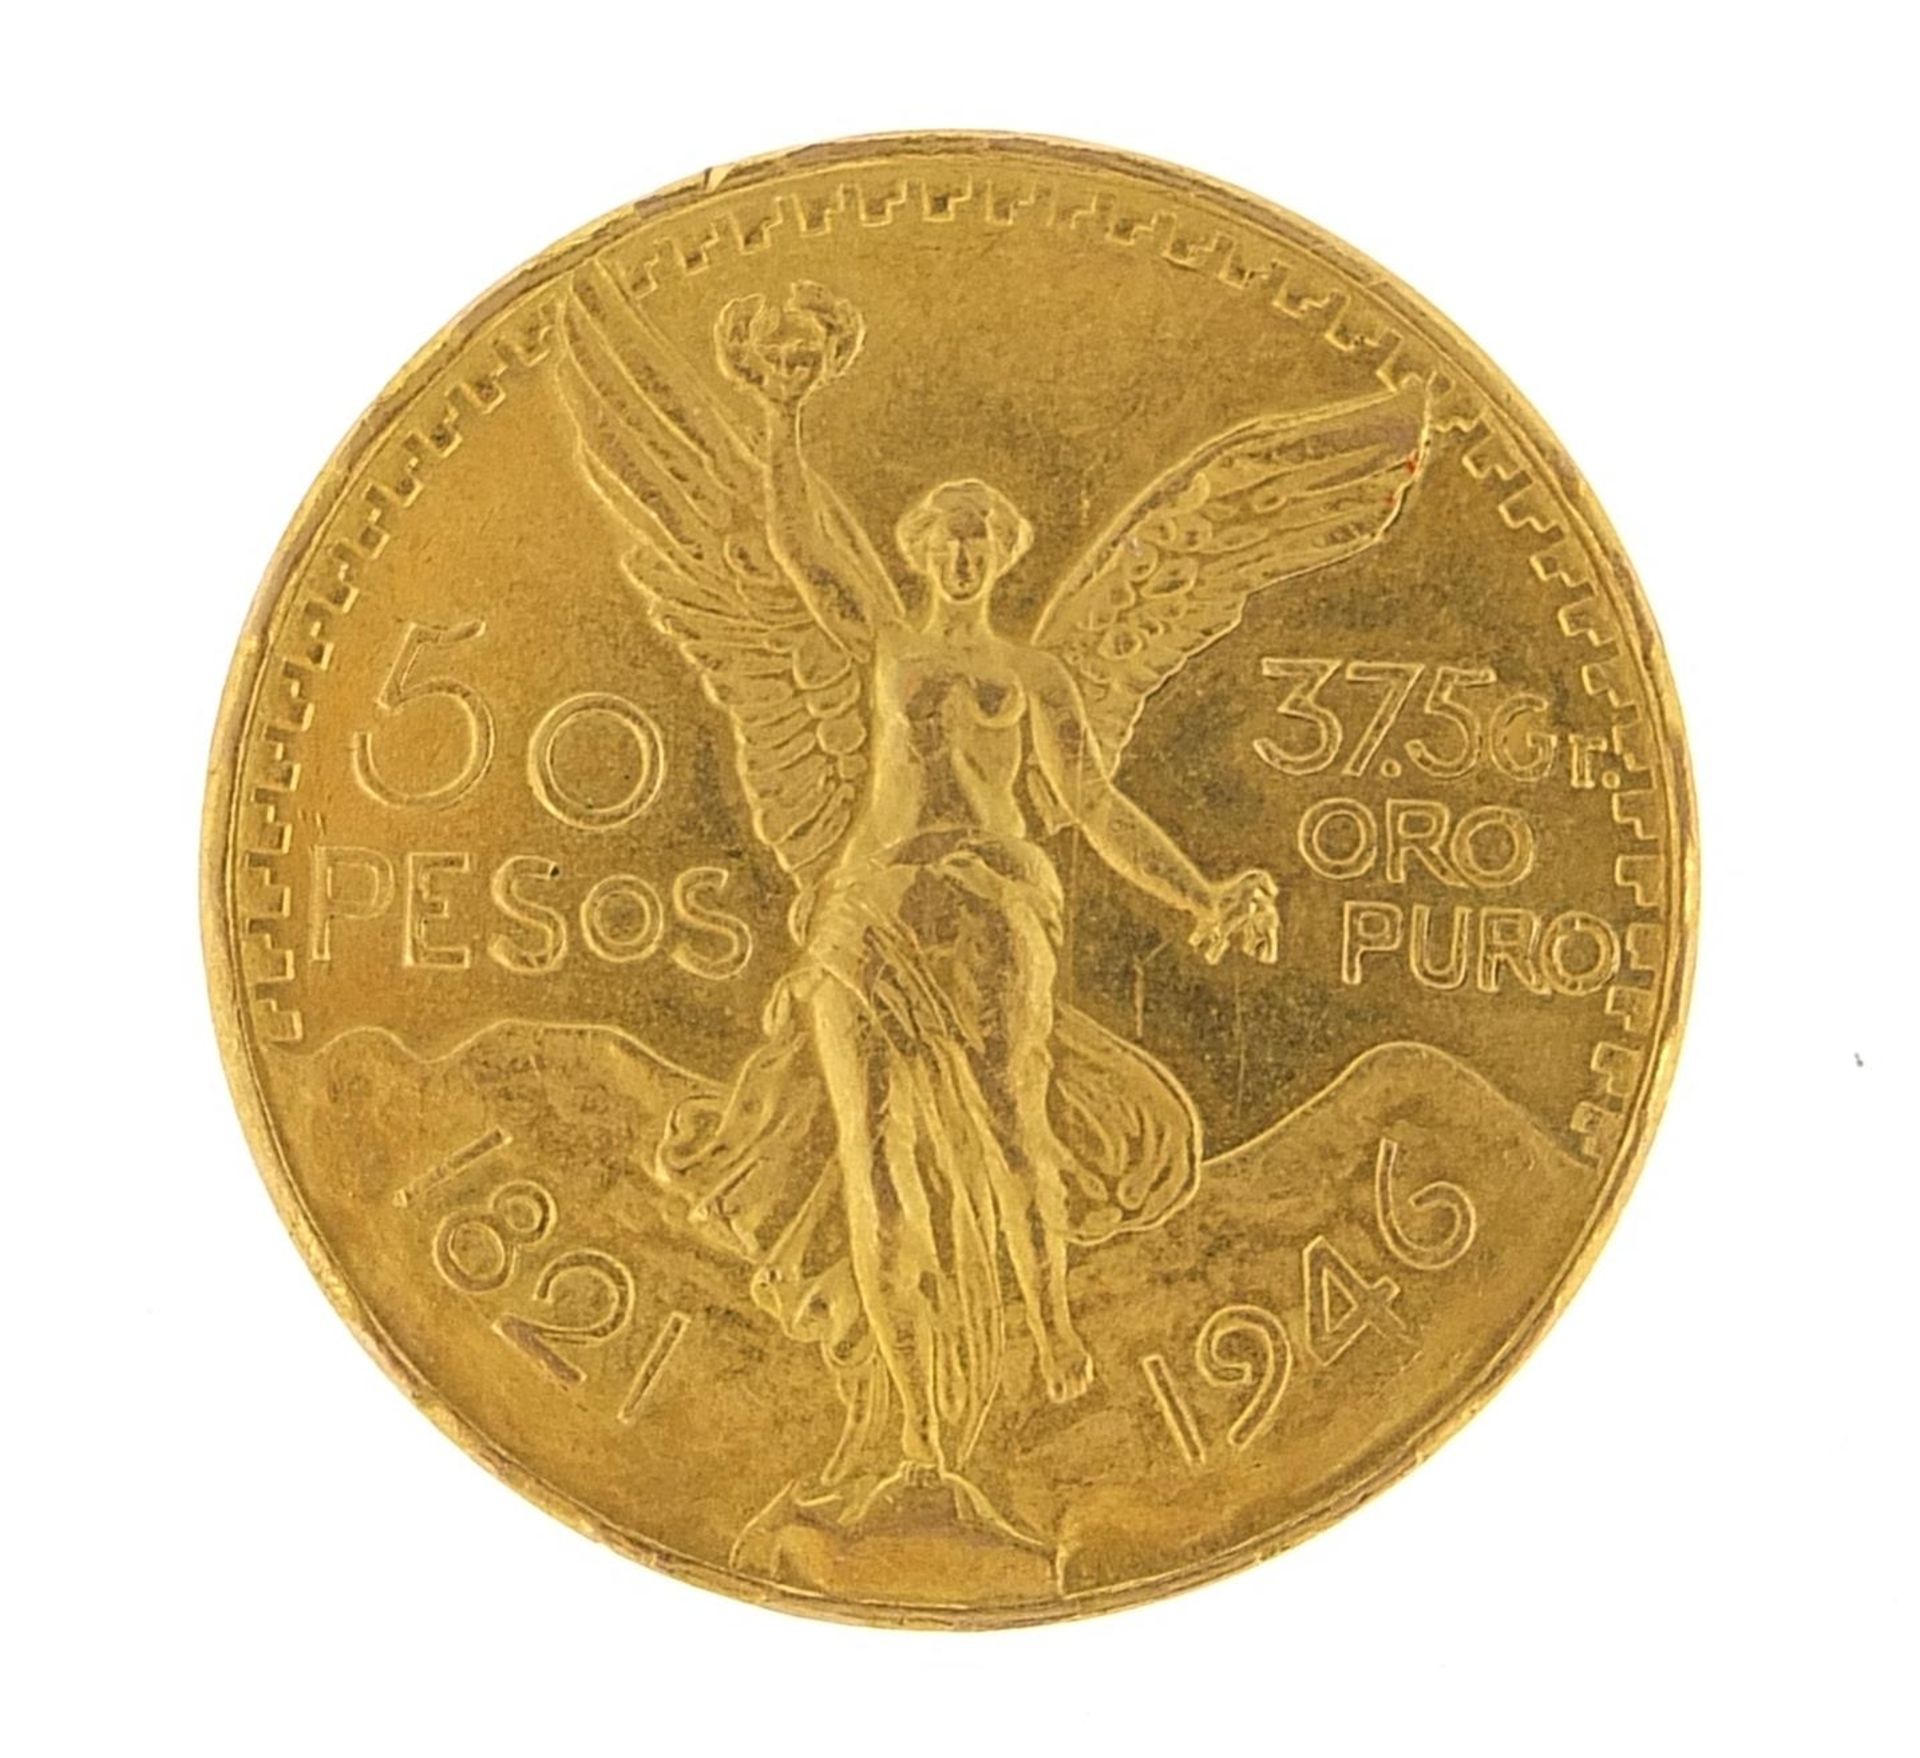 Mexican 1946 gold fifty pesos, 41.3g - this lot is sold without buyer?s premium, the hammer price is